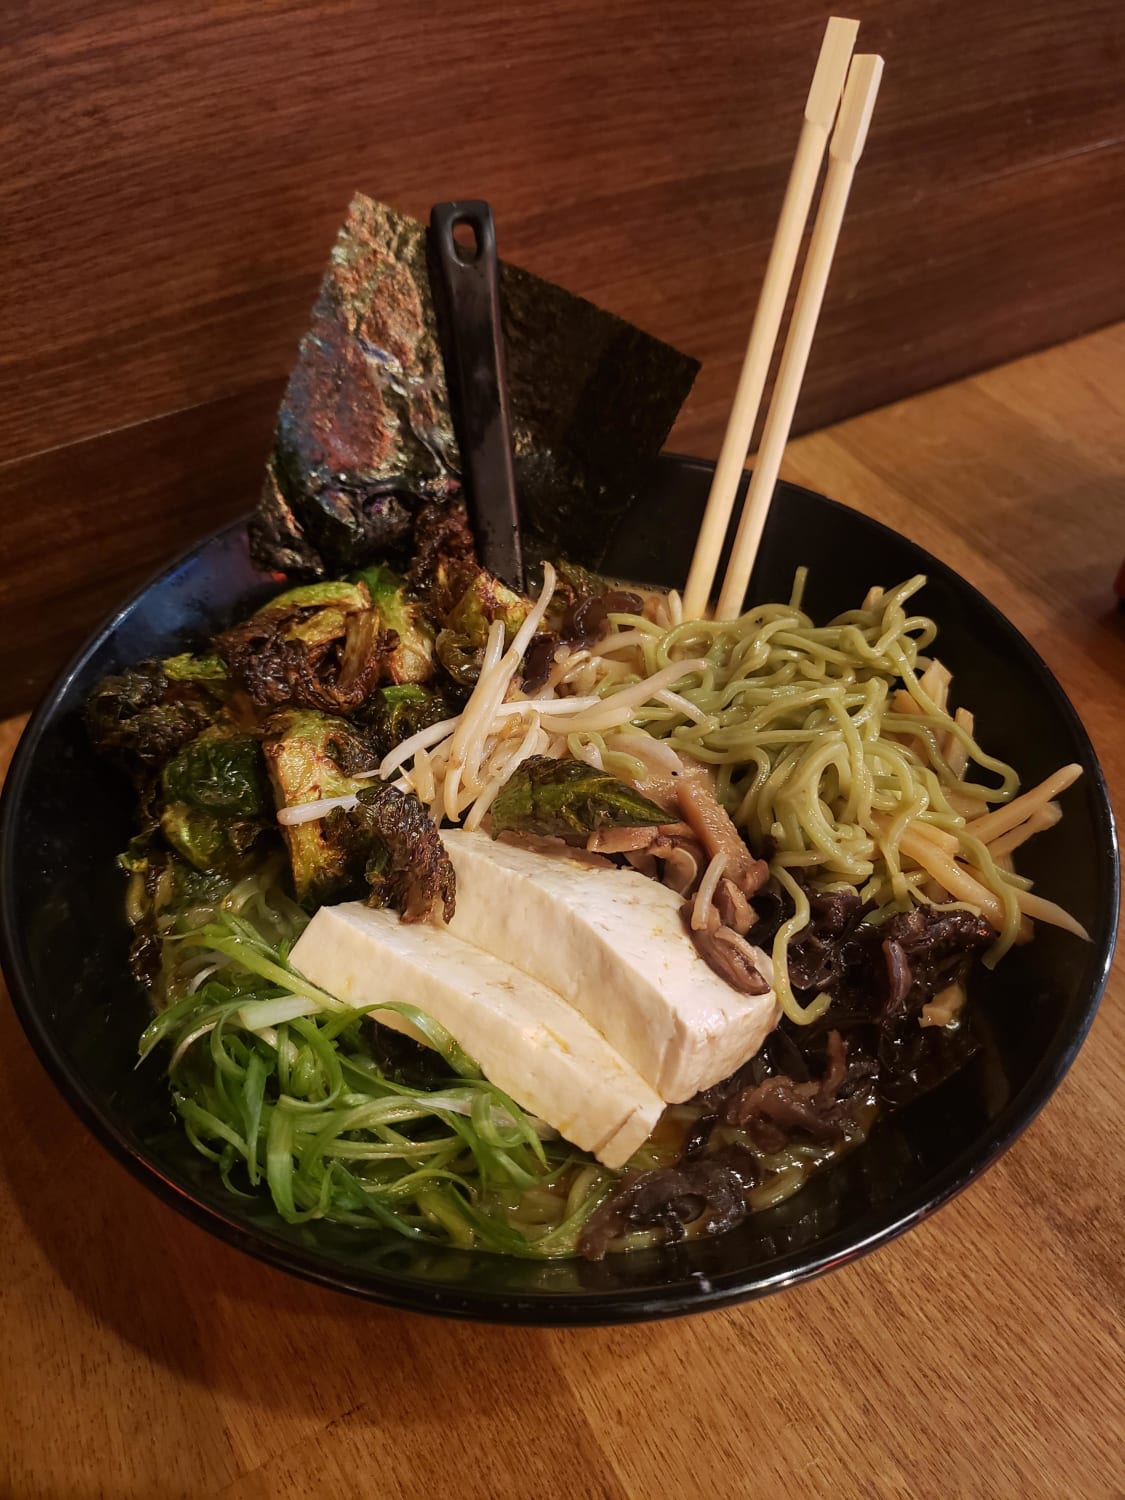 Creamy Vegan Ramen with Kale Ramen Noodles, Brussel Sprout, Tofu, Black and Shitake Mushroom, Green Onion and Bean Sprout!